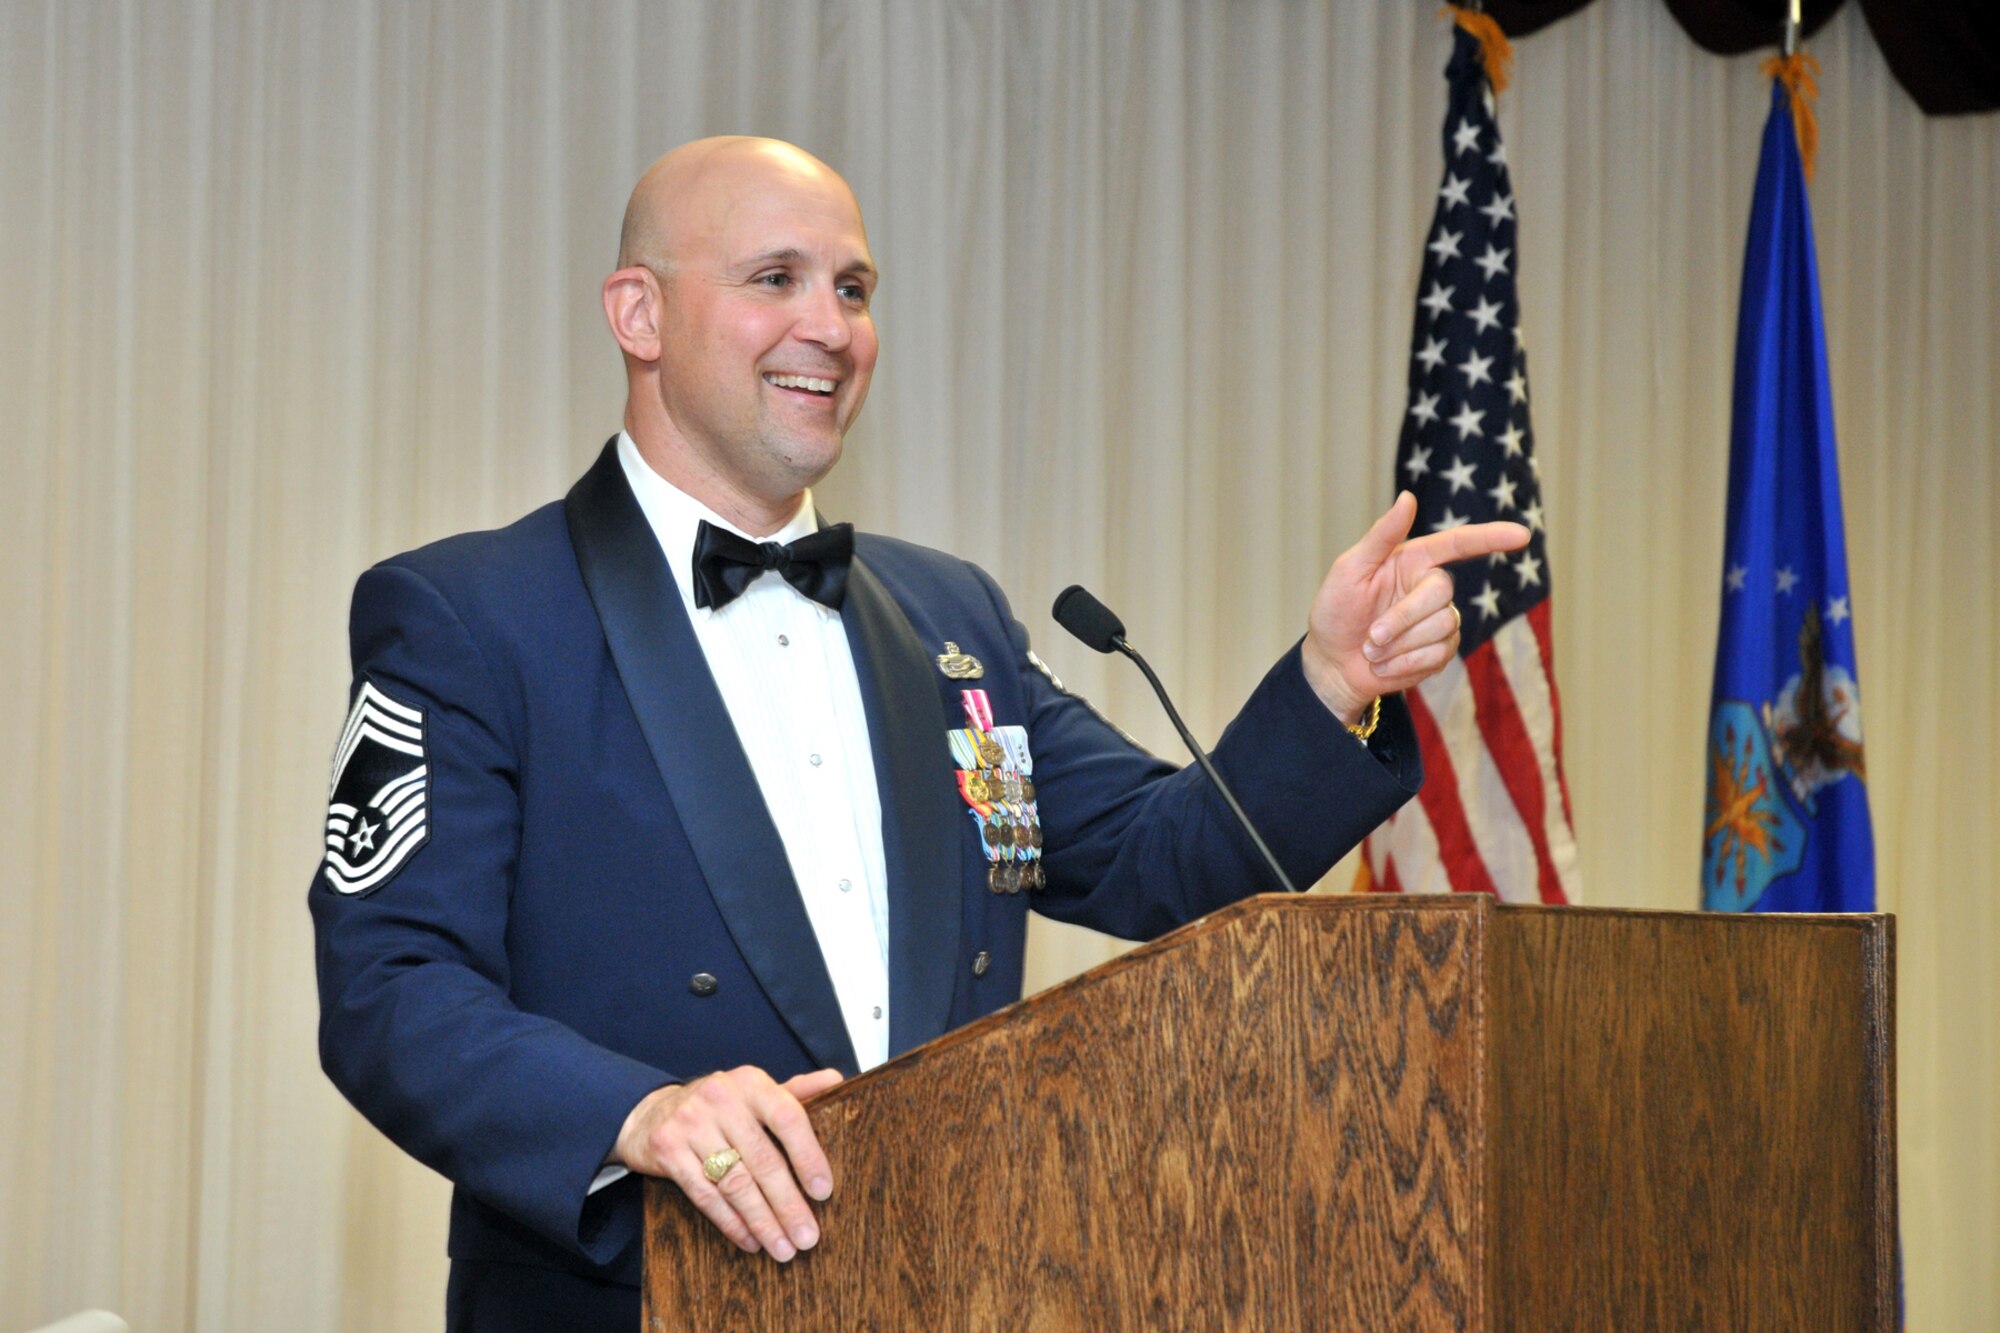 Chief Master Sgt. Damian Orslene speaks at an Airman Leadership School graduation March 30, 2010, at Keesler Air Force Base, Miss. Chief Orslene is competing in the inaugural Warrior Games May 10 through 14, 2010, in Colorado Springs, Colo. Chief Orslene was injured while deployed to Iraq. He is the 81st Training Support Squadron superintendent. (U.S. Air Force photo/Adam Bond)